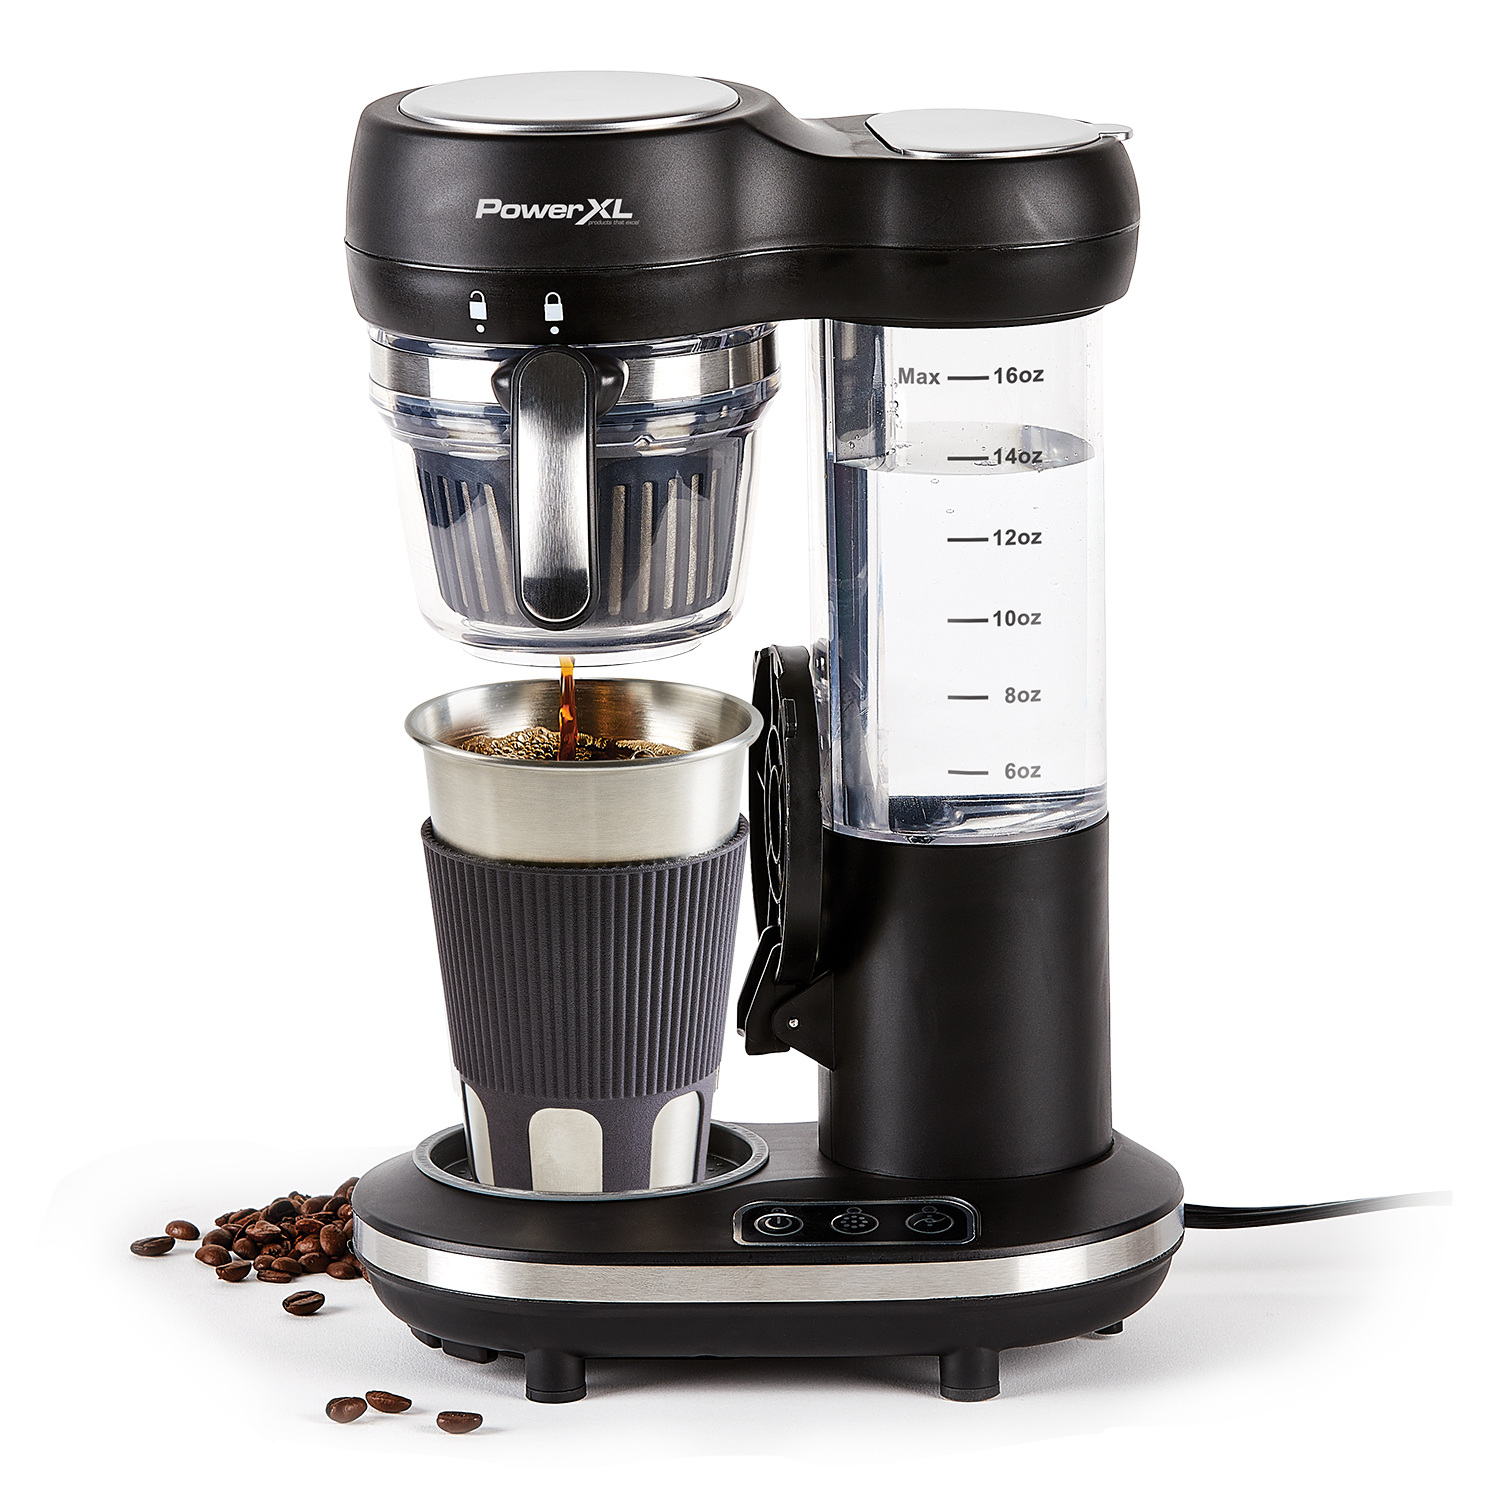 PowerXL Grind and Go Plus Coffee Maker, Automatic Single-Serve Coffee Machine with 16-Oz - image 1 of 6